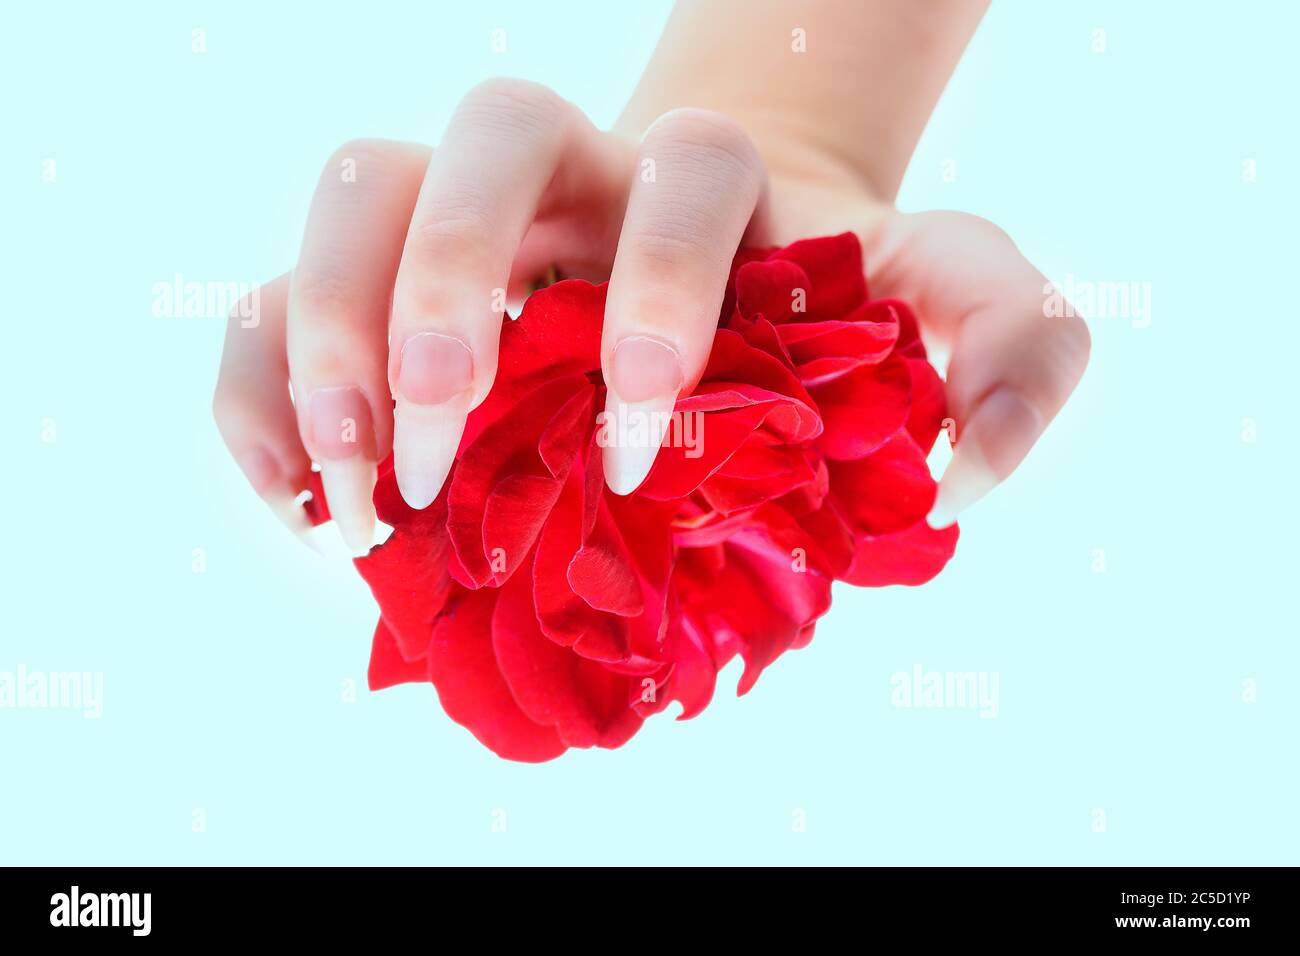 Natural manicure nails. Beautiful girl hands holding red rose. Rose in the hands girl close-up. Beautiful, natural fingernails. Nails, hands, rose clo Stock Photo